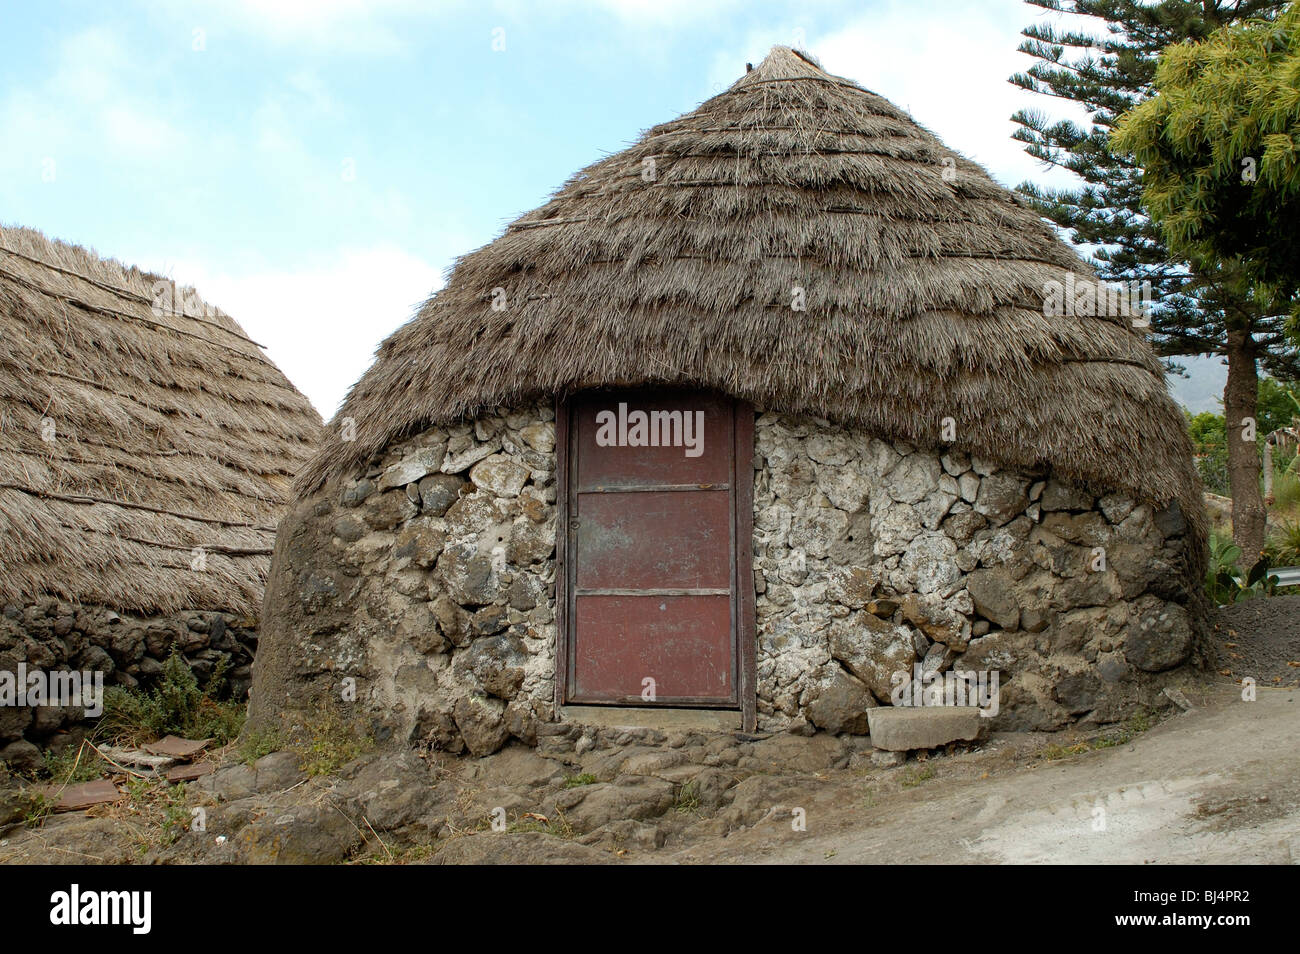 Spain, Canary Islands, Tenerife thatched hut near Los Realejos Stock Photo